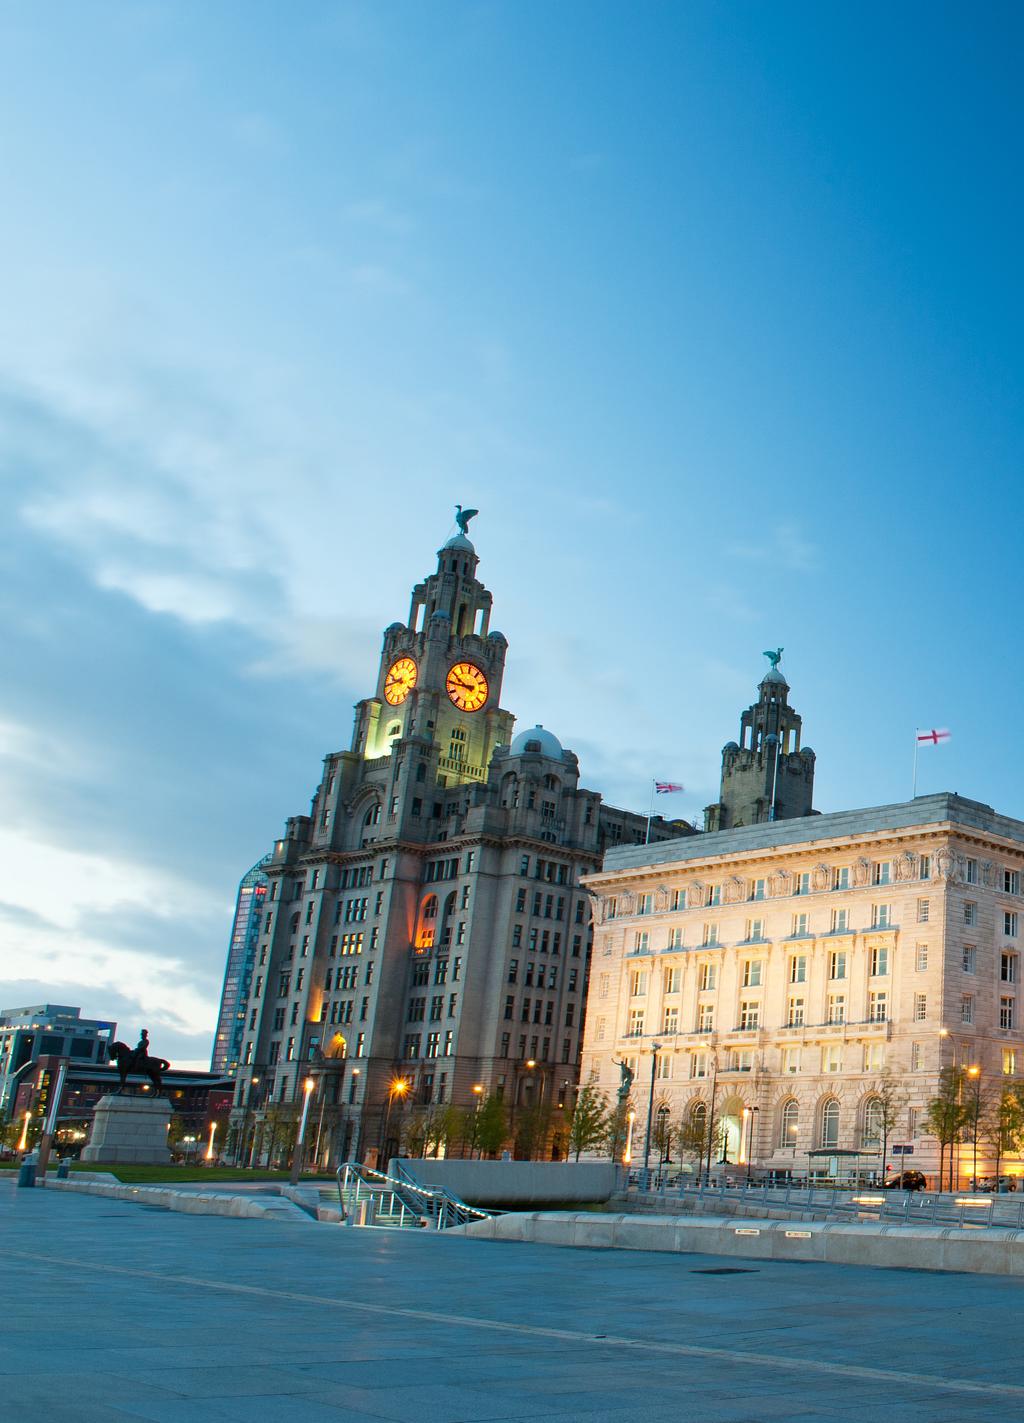 INVEST IN THE BUY-TO-LET MARKET 6 The UK s buy-to-let market is thriving. In recent years, the market has seen a seismic shift from London to more regional cities like Liverpool and Manchester.